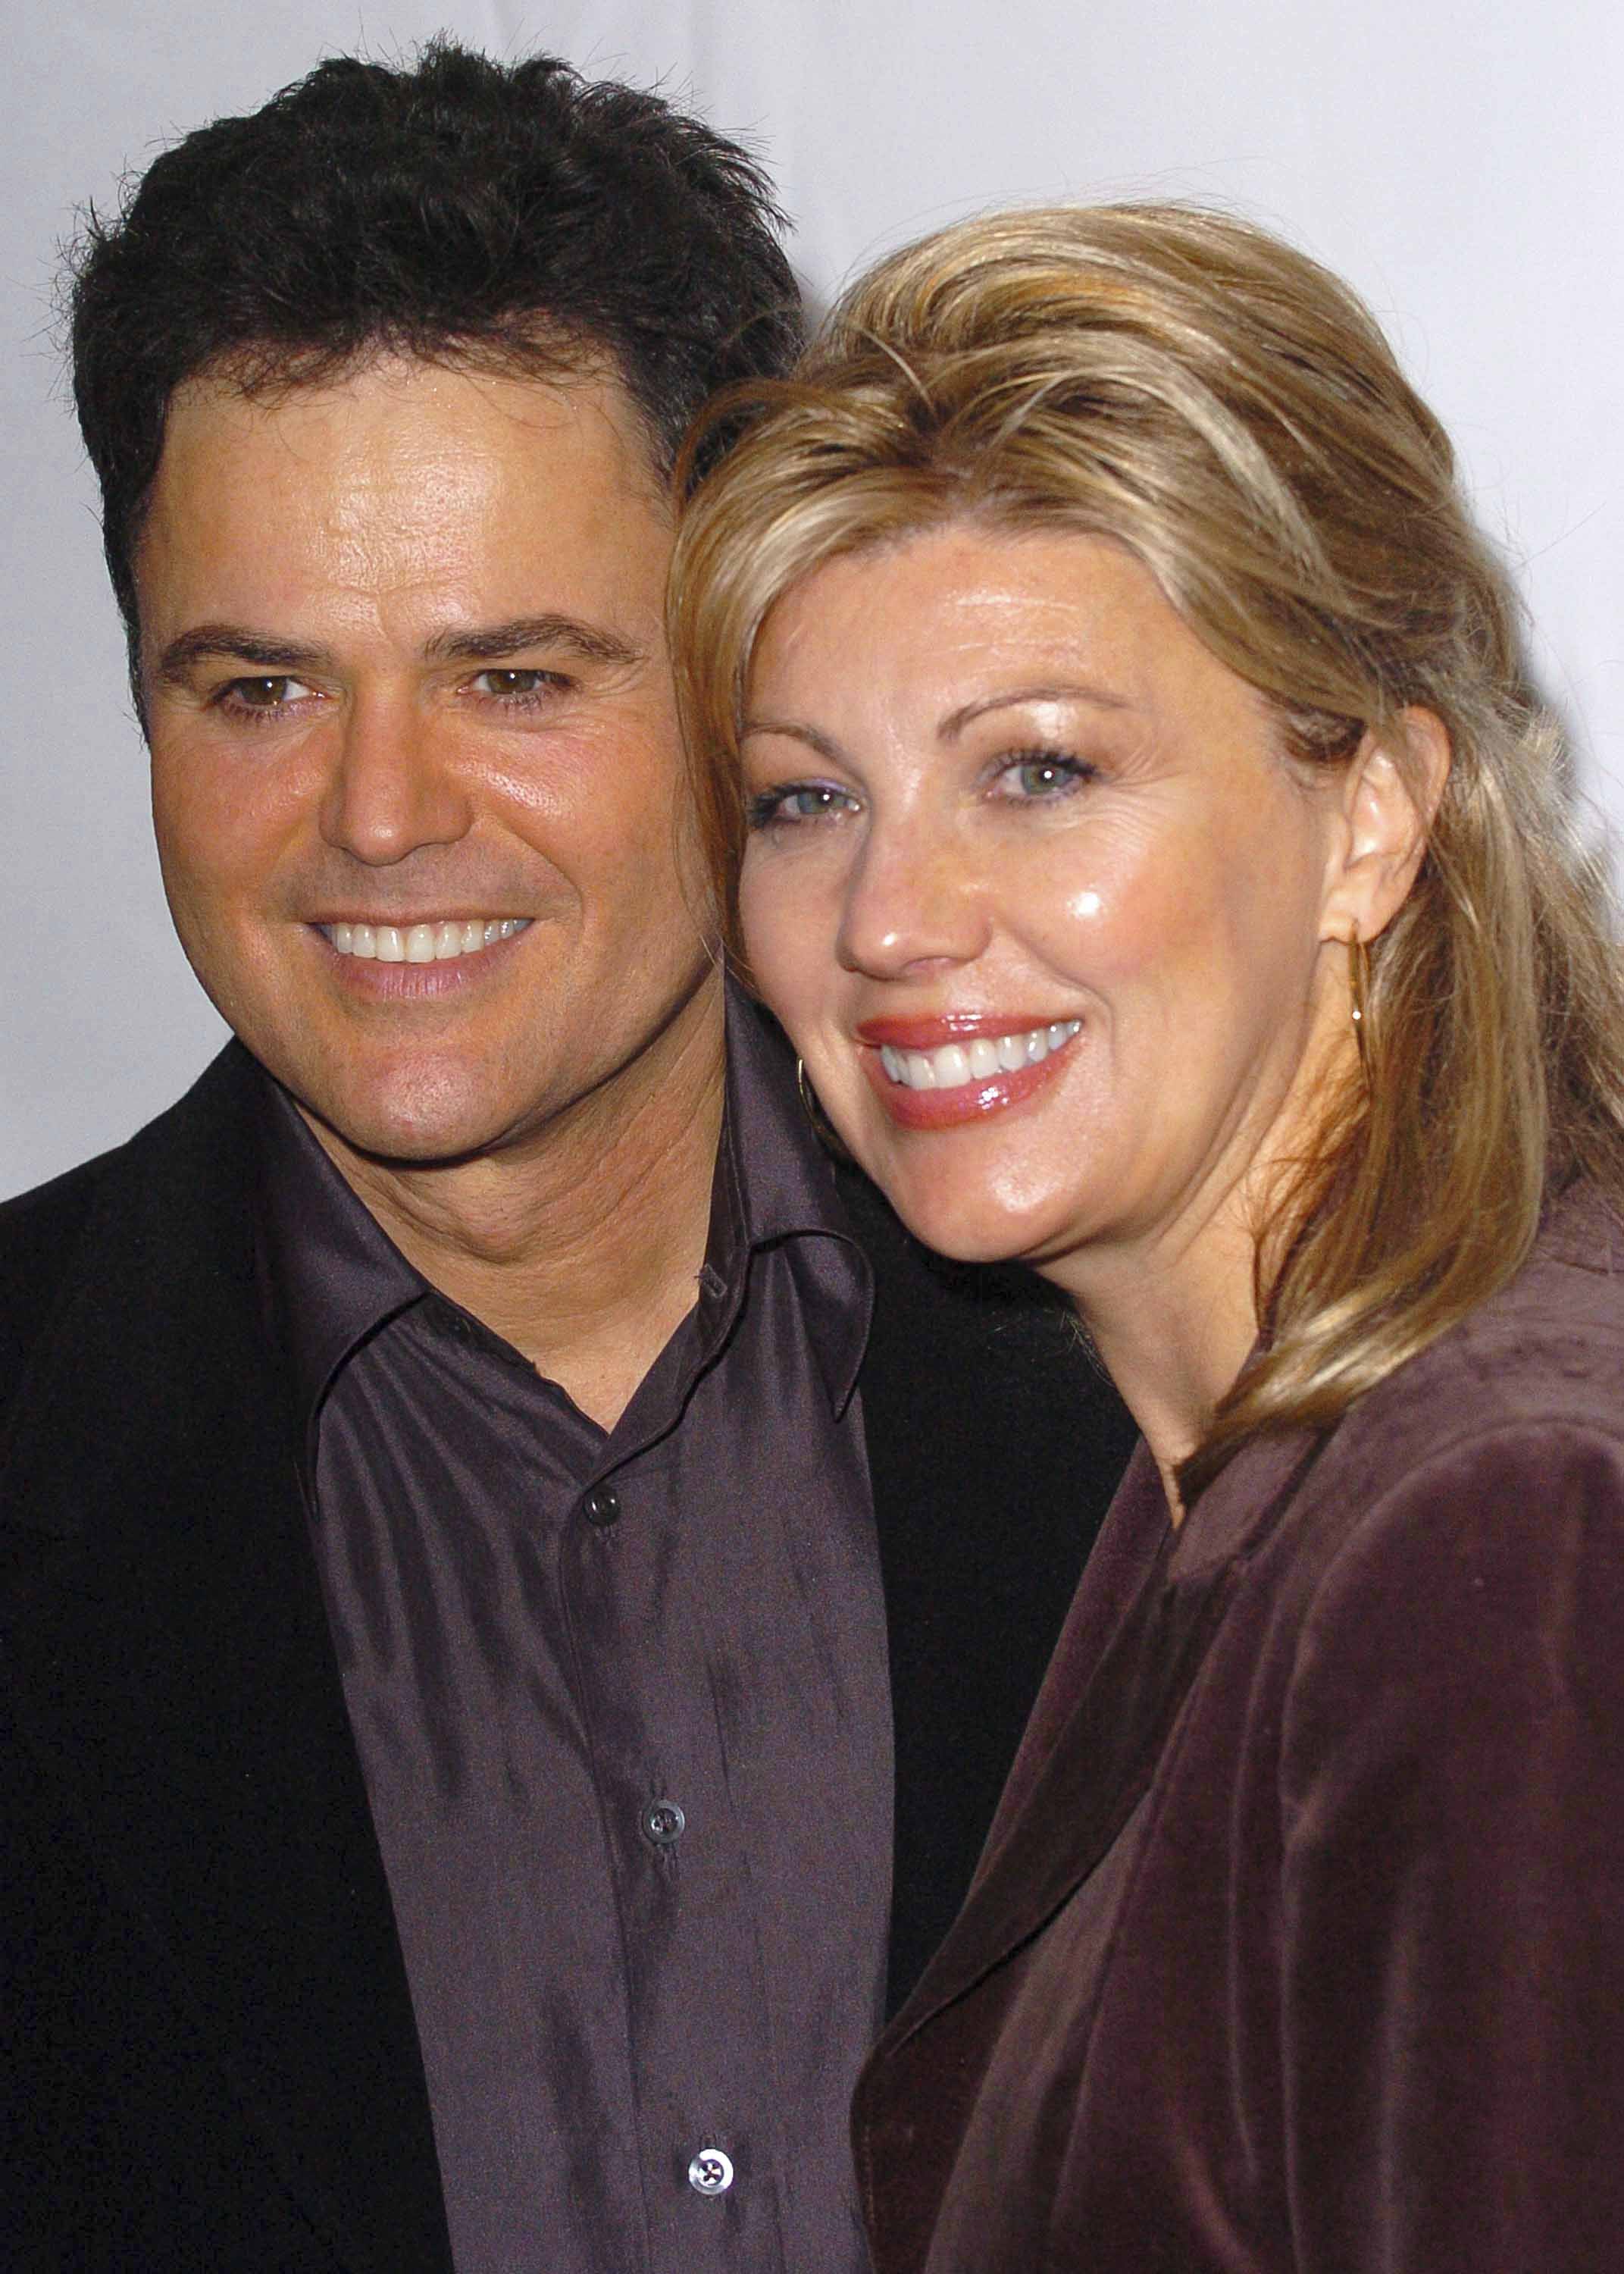 Donny Osmond with wife Debbie Osmond arrive at Tony Di Napoli restaurant for the after party celebrating Donny Osmond's opening night in Beauty and the Beast on September 24, 2006, in New York | Source: Getty Images